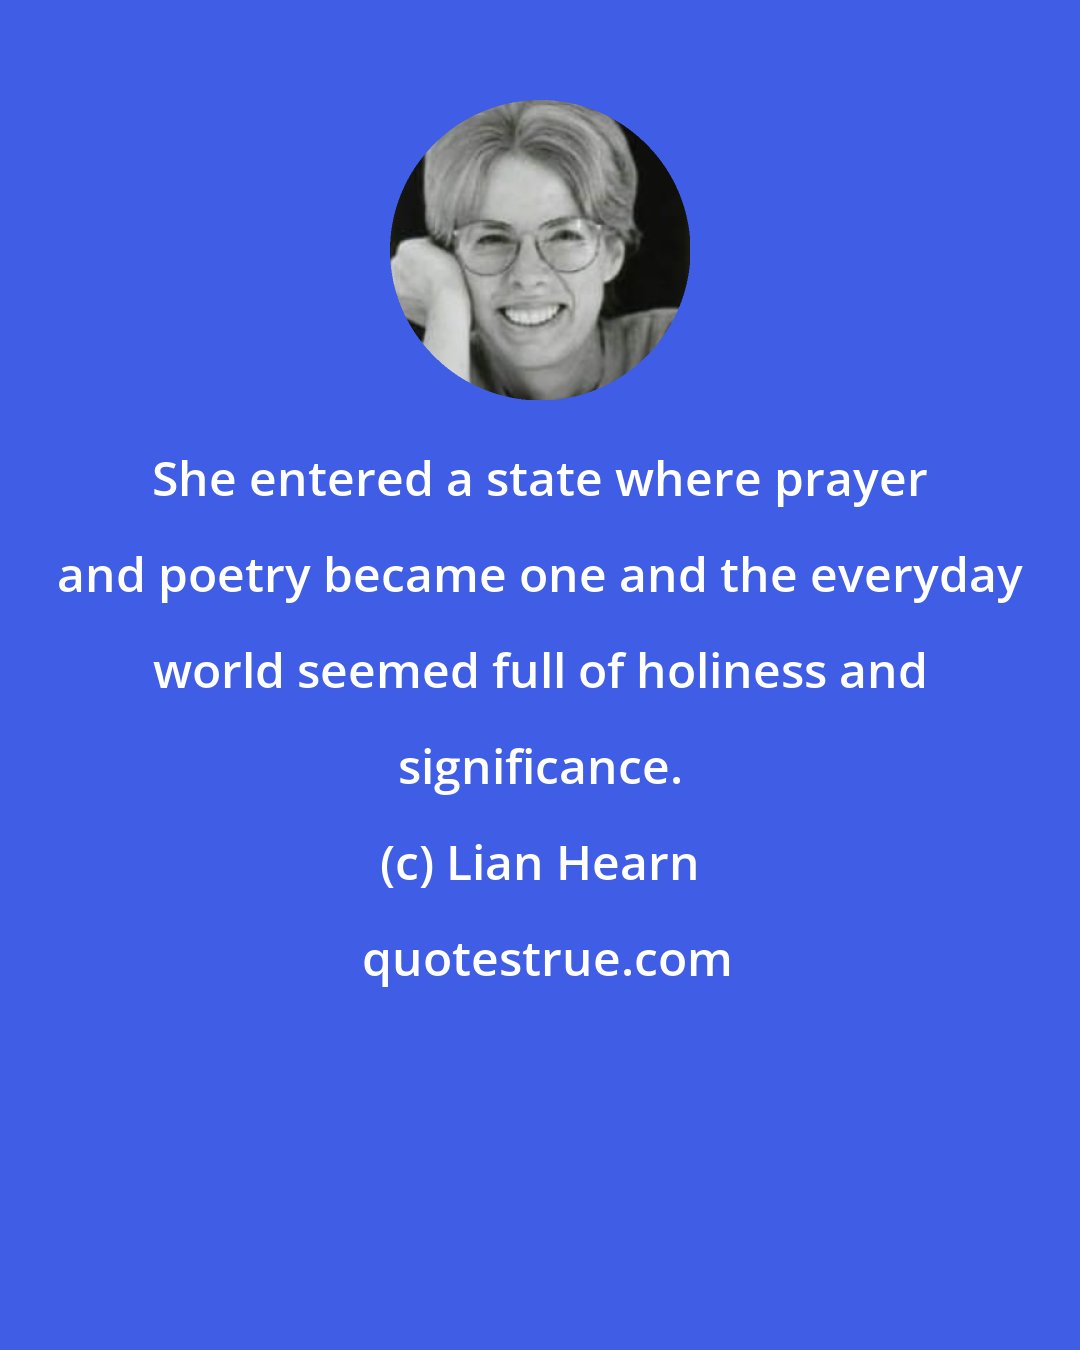 Lian Hearn: She entered a state where prayer and poetry became one and the everyday world seemed full of holiness and significance.